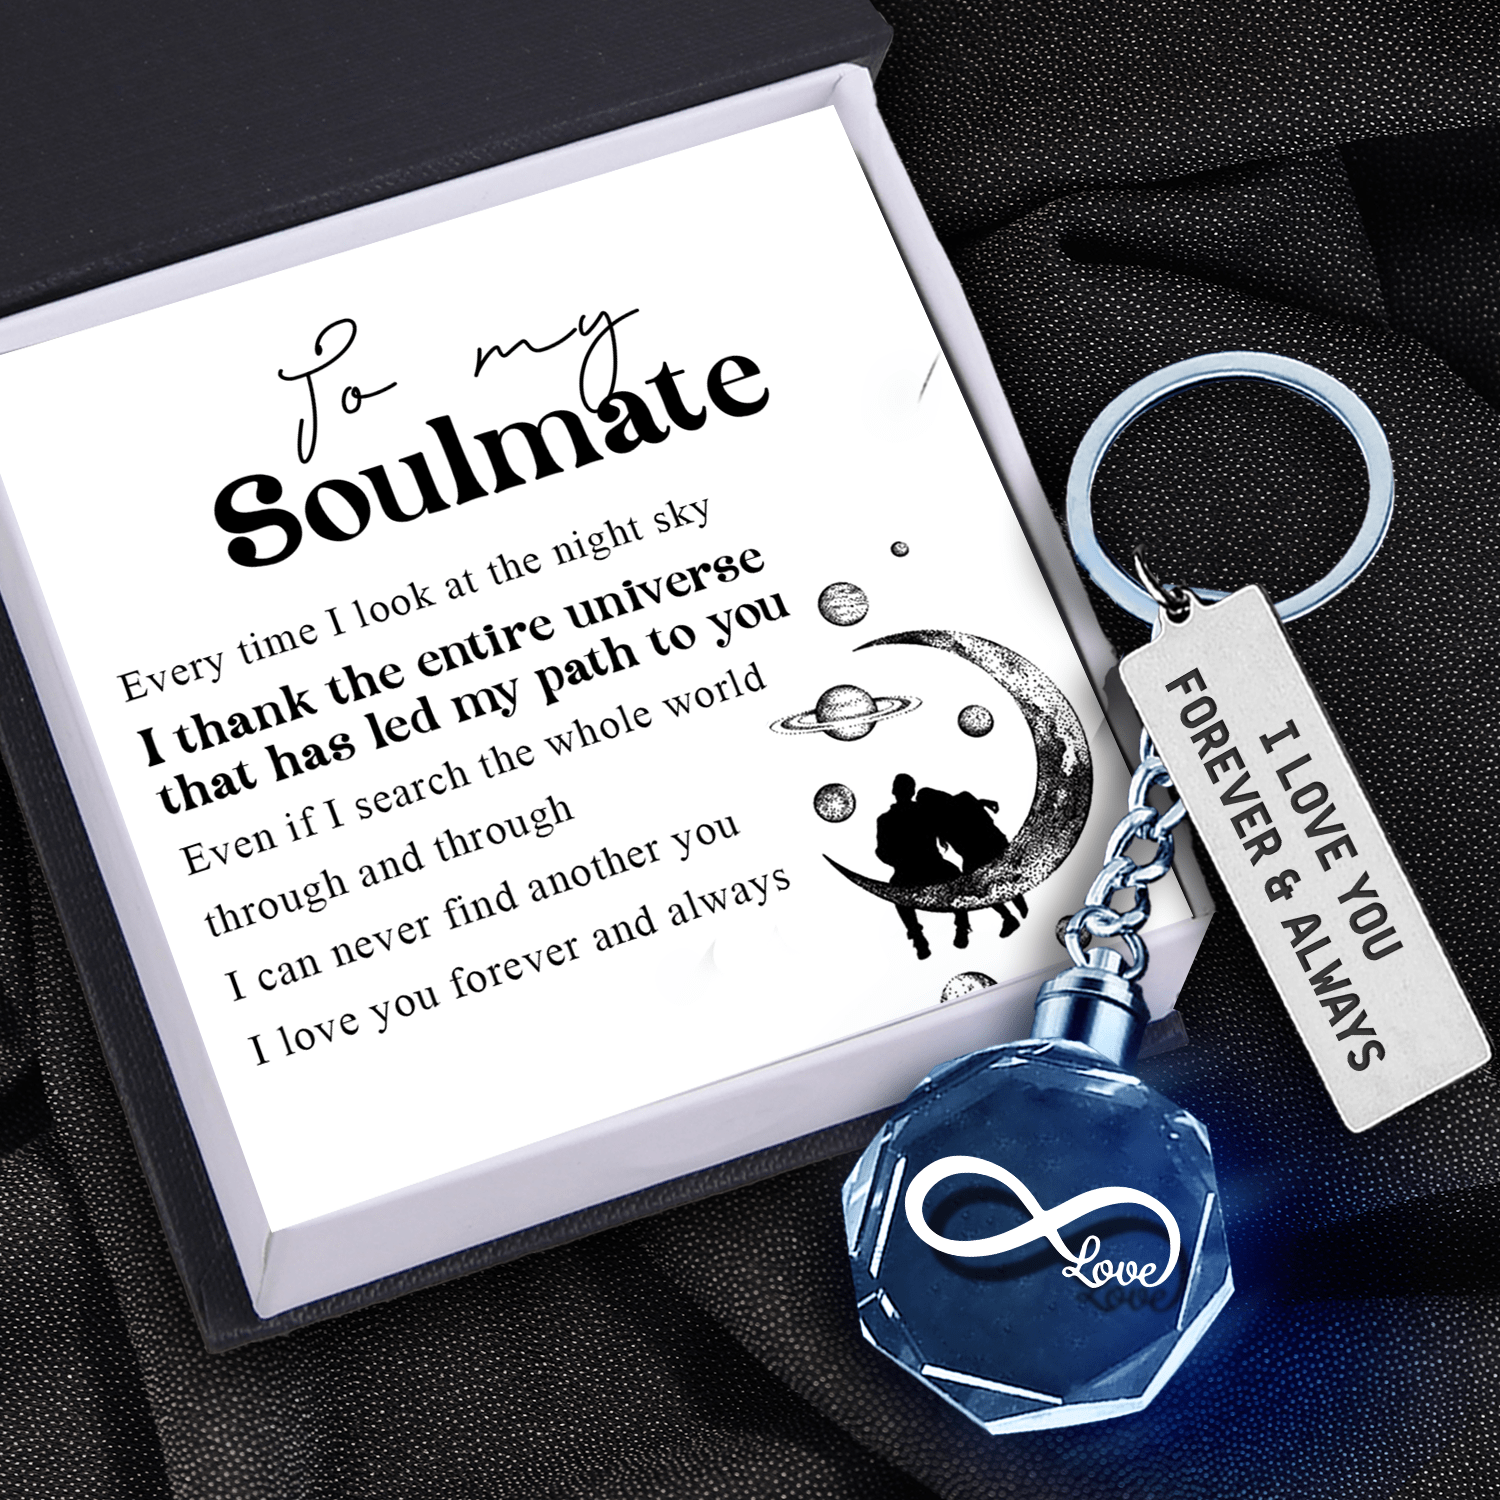 Led Light Keychain - Family - To My Soulmate - I Can Never Find Another You - Gkwl13002